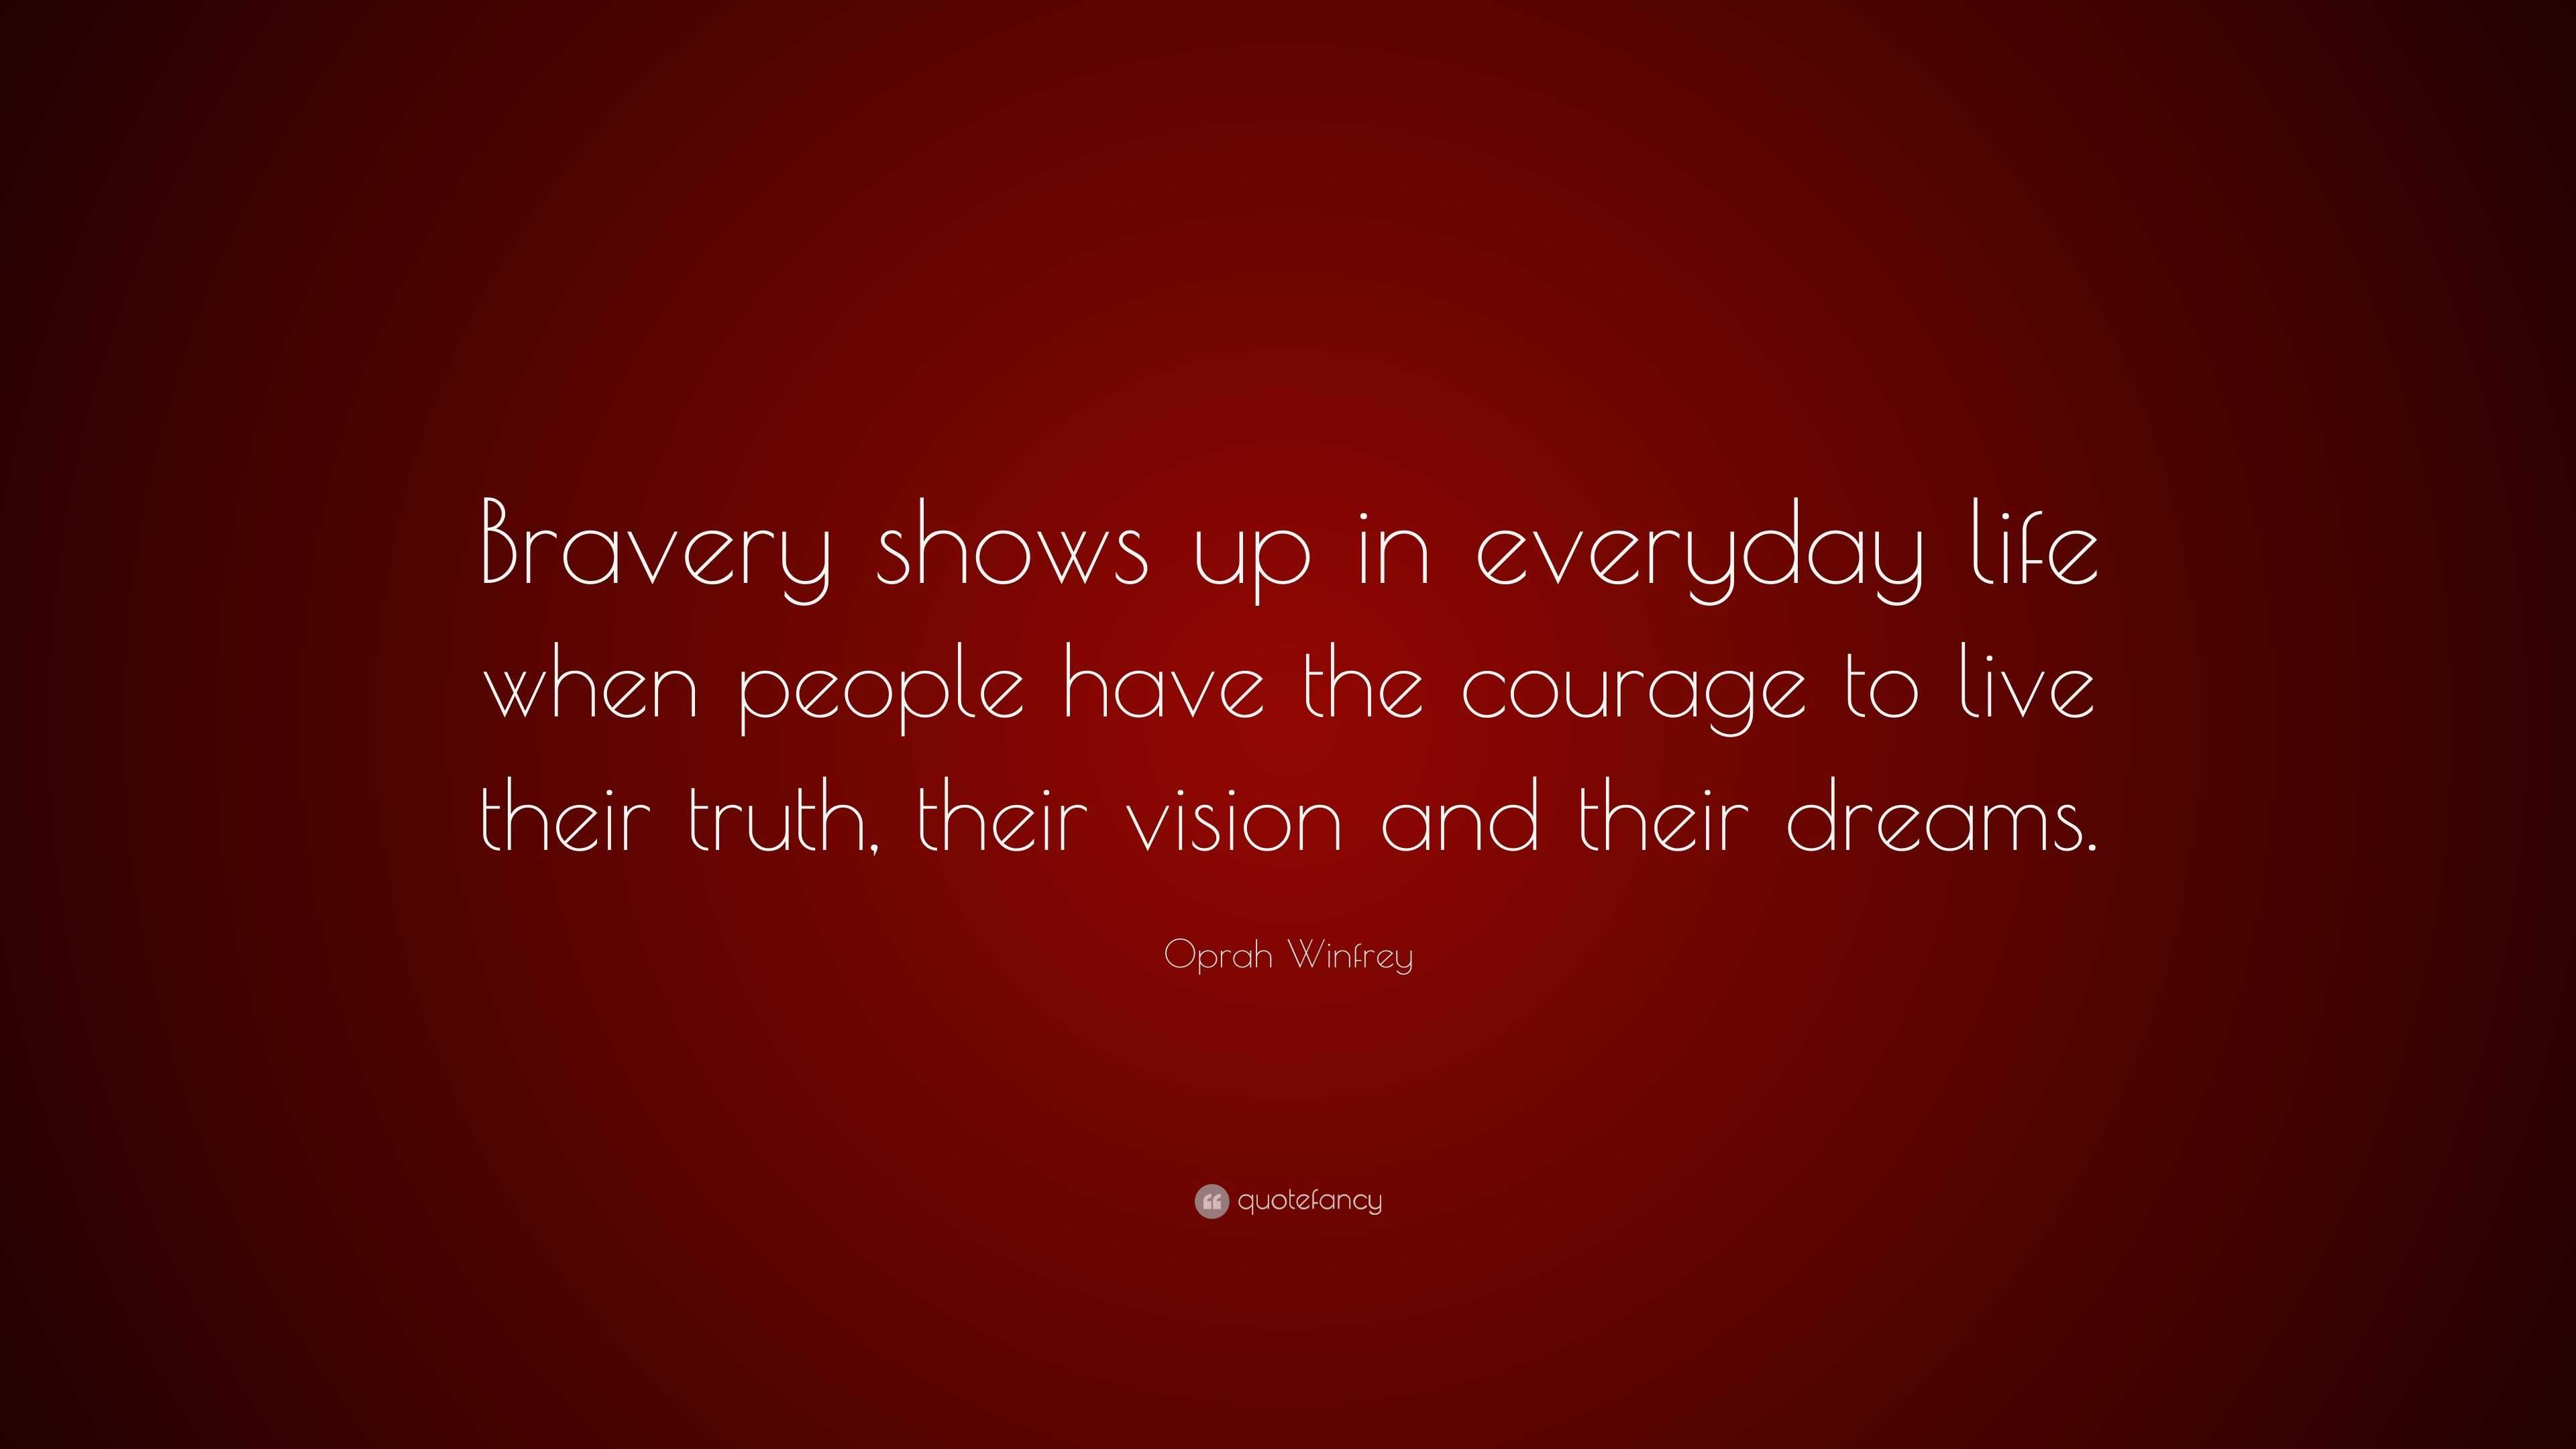 Oprah Winfrey Quote: “Bravery shows up in everyday life when people have  the courage to live